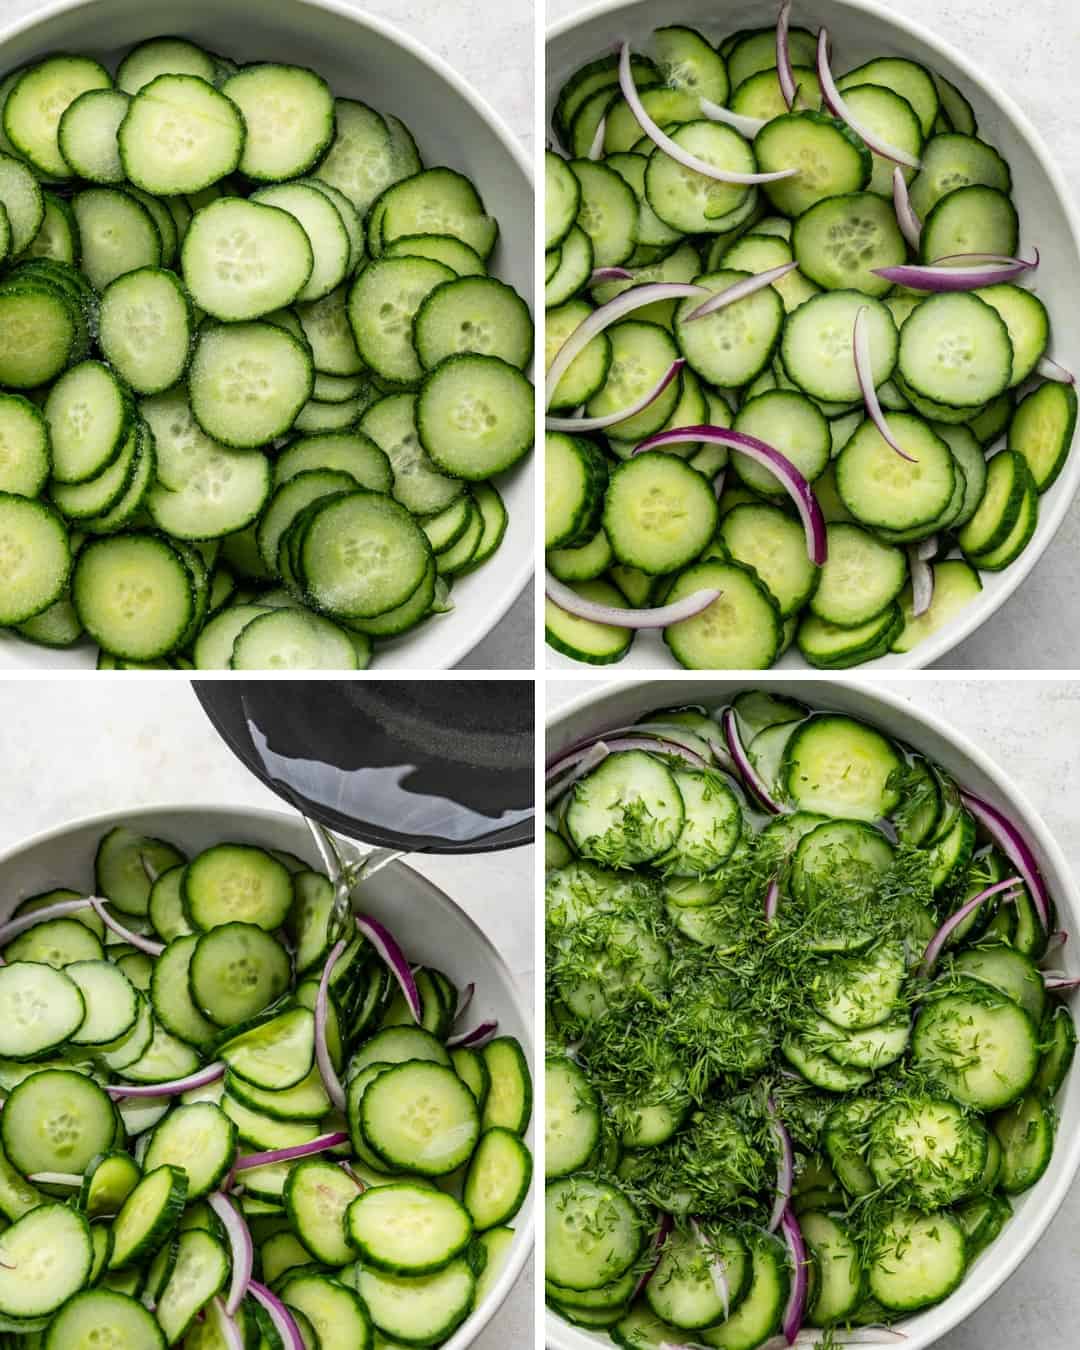 A collage of four images showing steps in the process of making German-style cucumber salad.